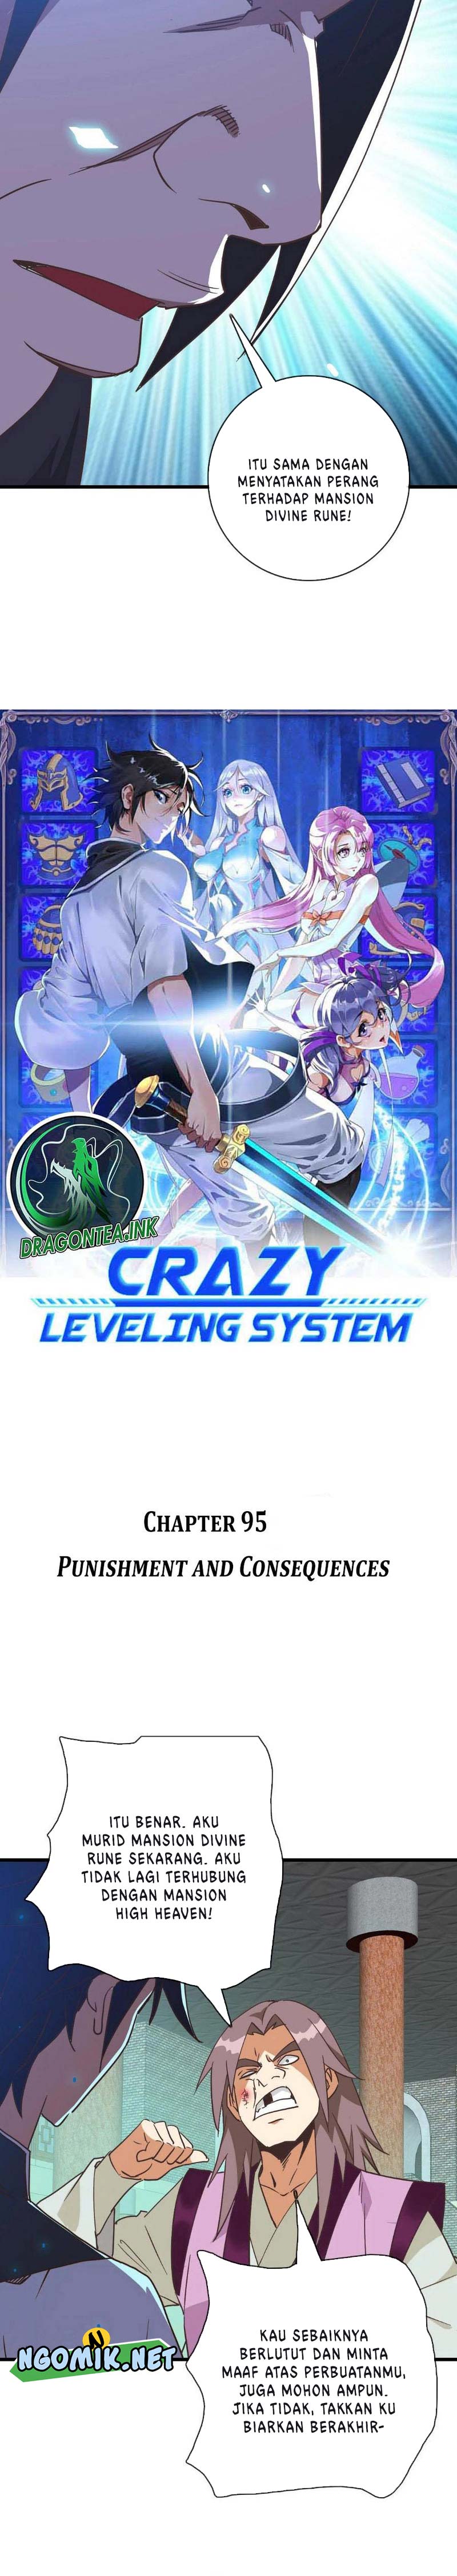 Crazy Leveling System Chapter 95